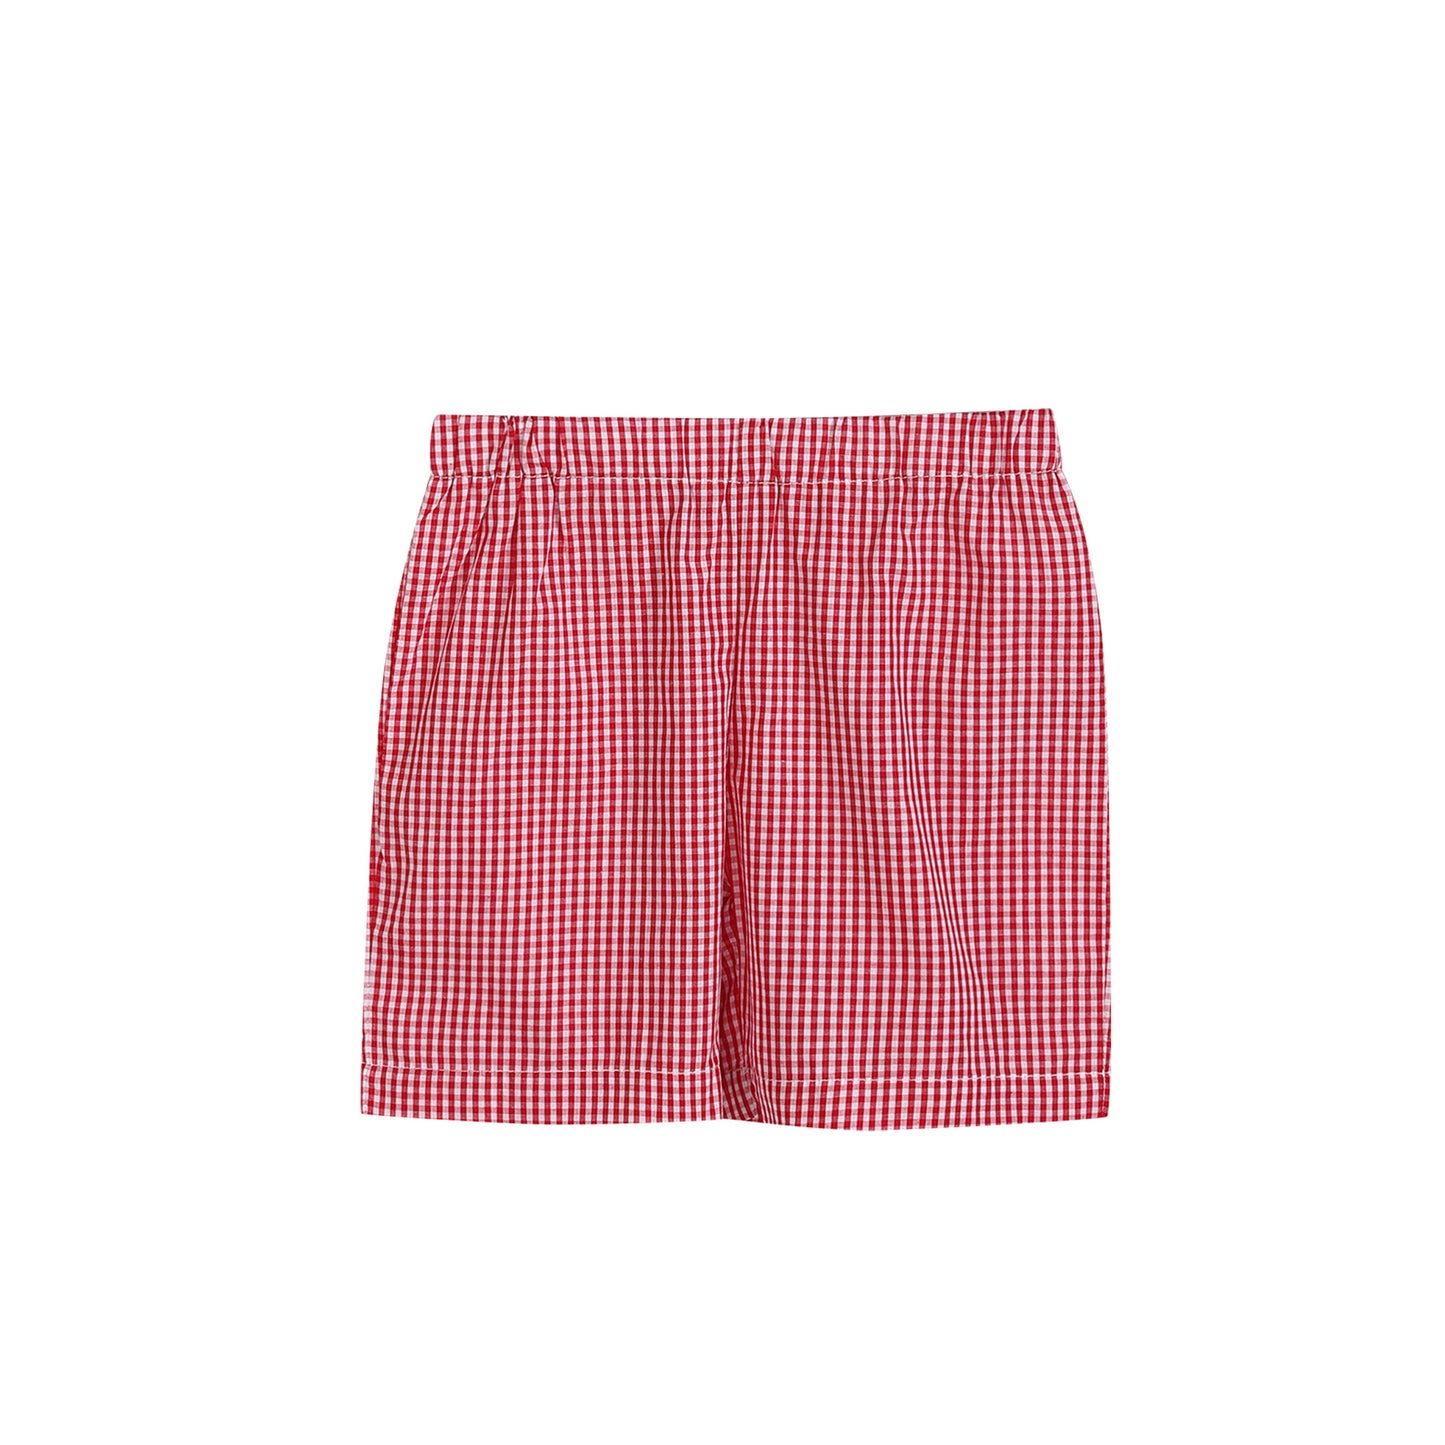 Blue Crab Shirt and Red Gingham Shorts Set